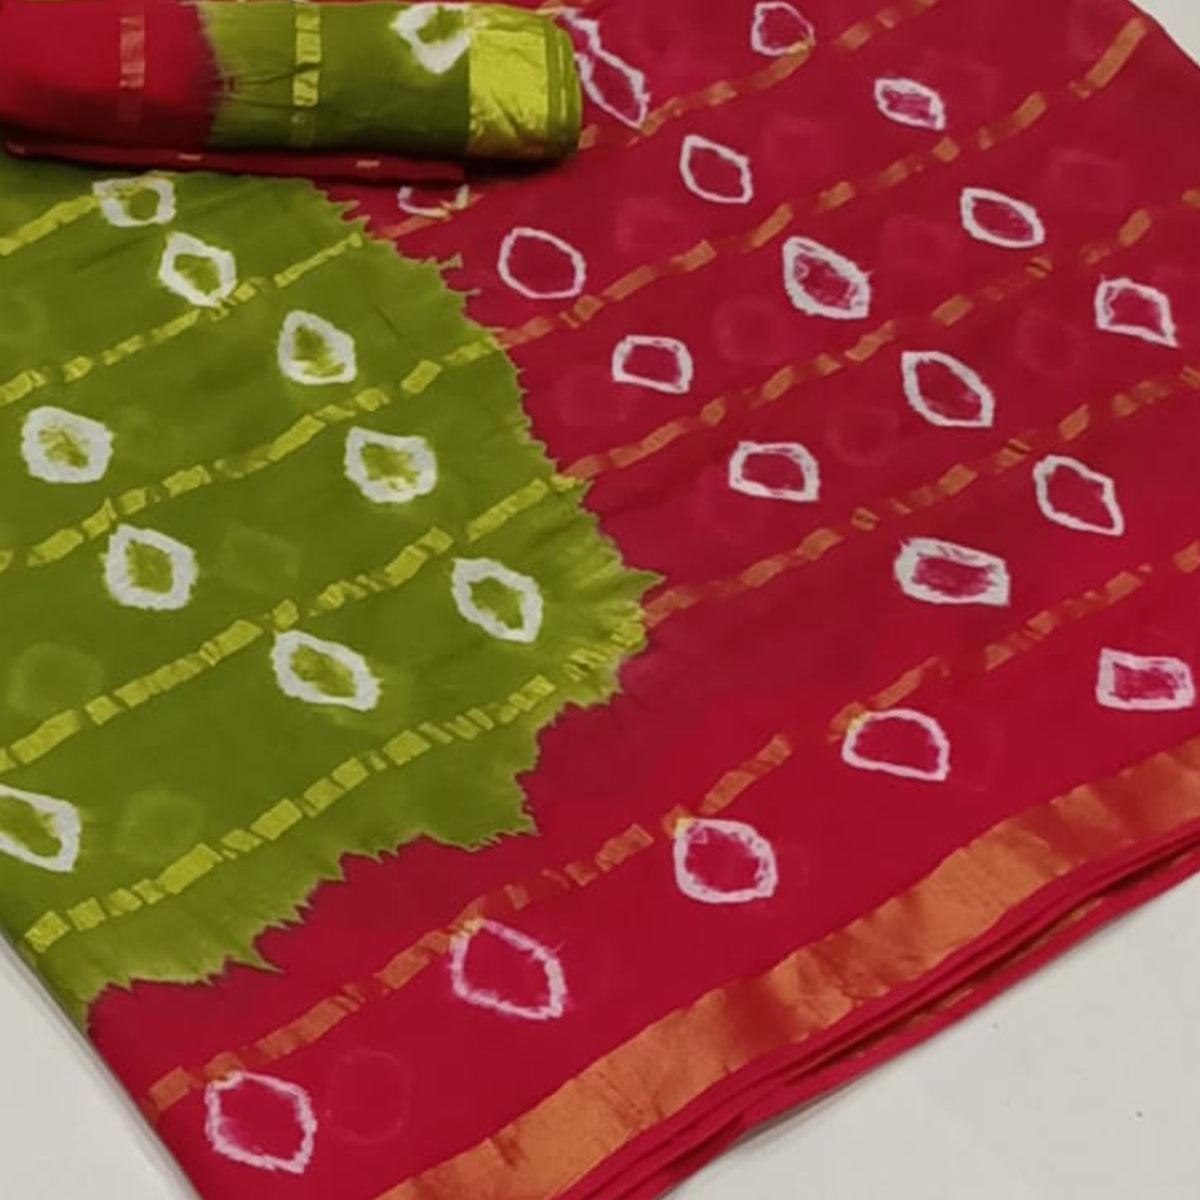 Flattering Olive Green-Red Colored Casual Wear Bandhani Print Cotton Saree - Peachmode